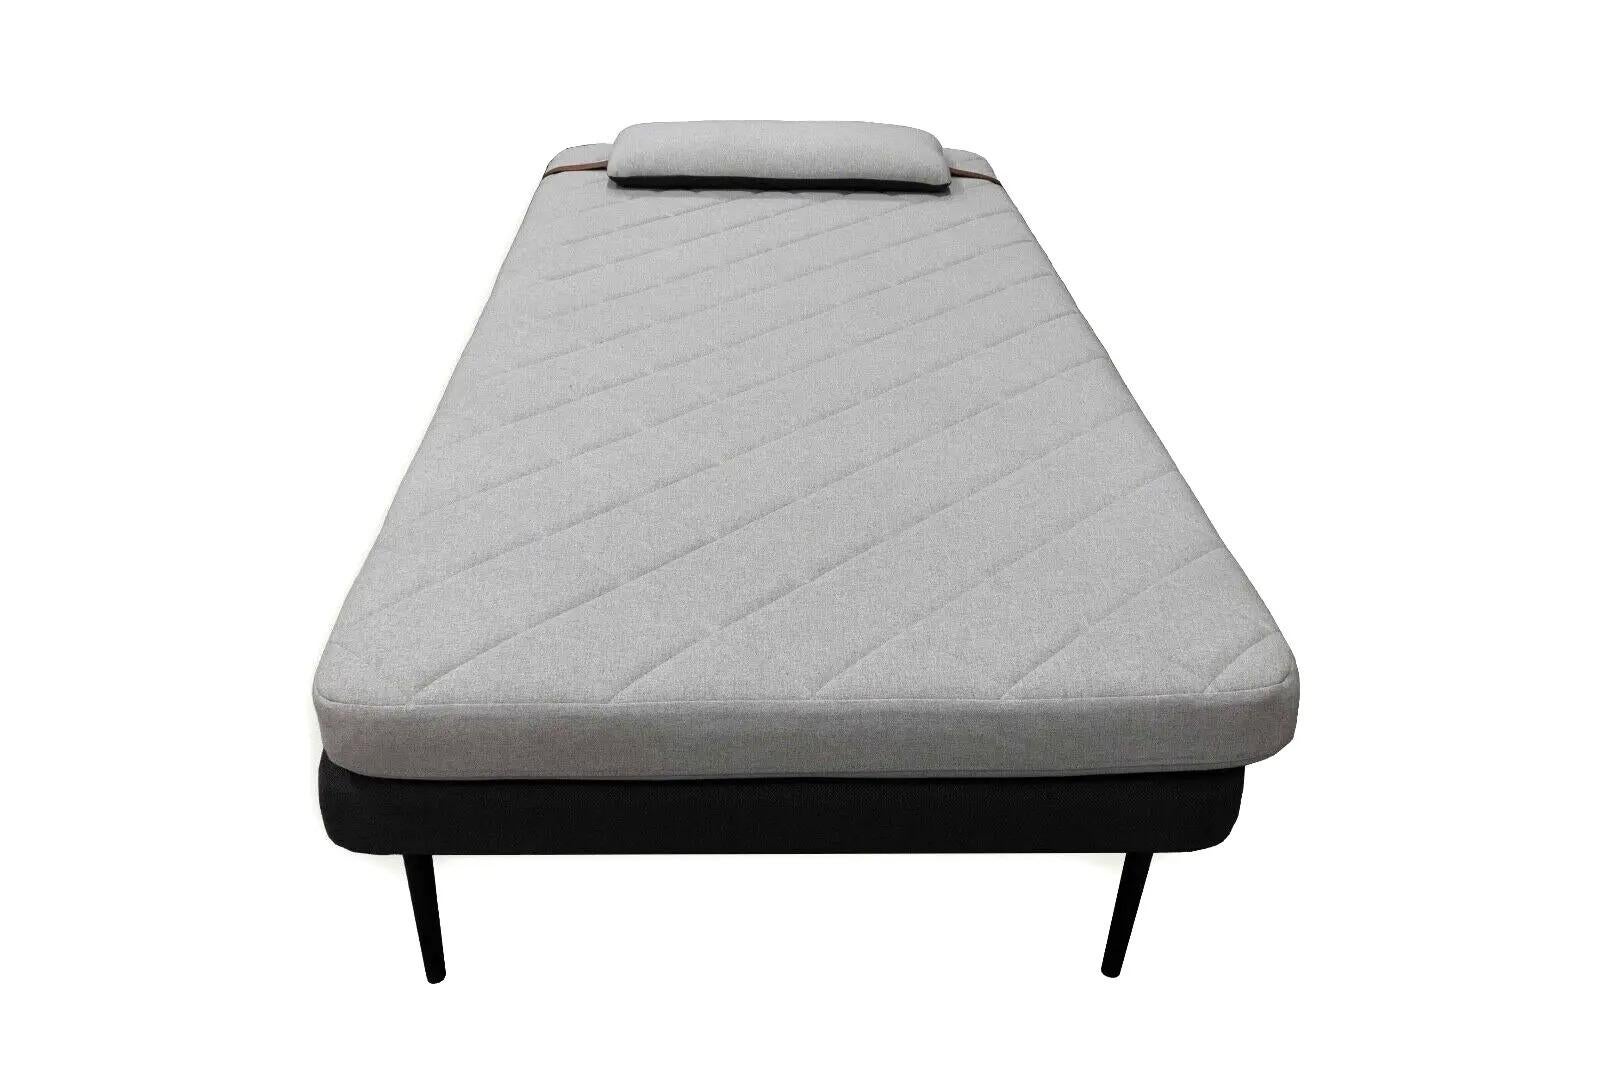 Contemporary Modern Light Grey Daybed with Detachable Pillow with Leather Straps In Good Condition For Sale In Keego Harbor, MI